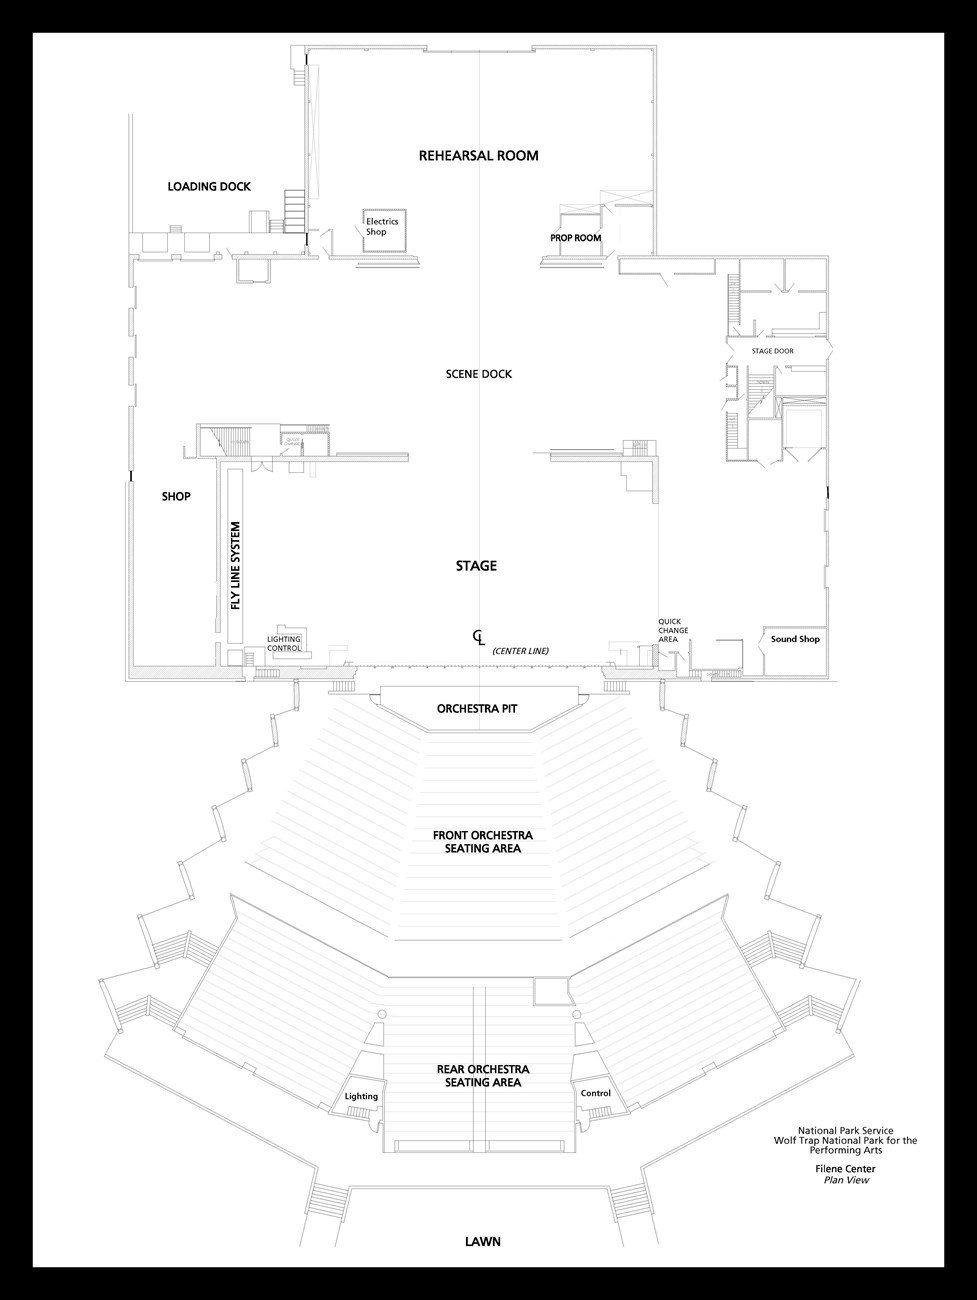 Plan view of the Filene Center theater and house from an aerial perspective